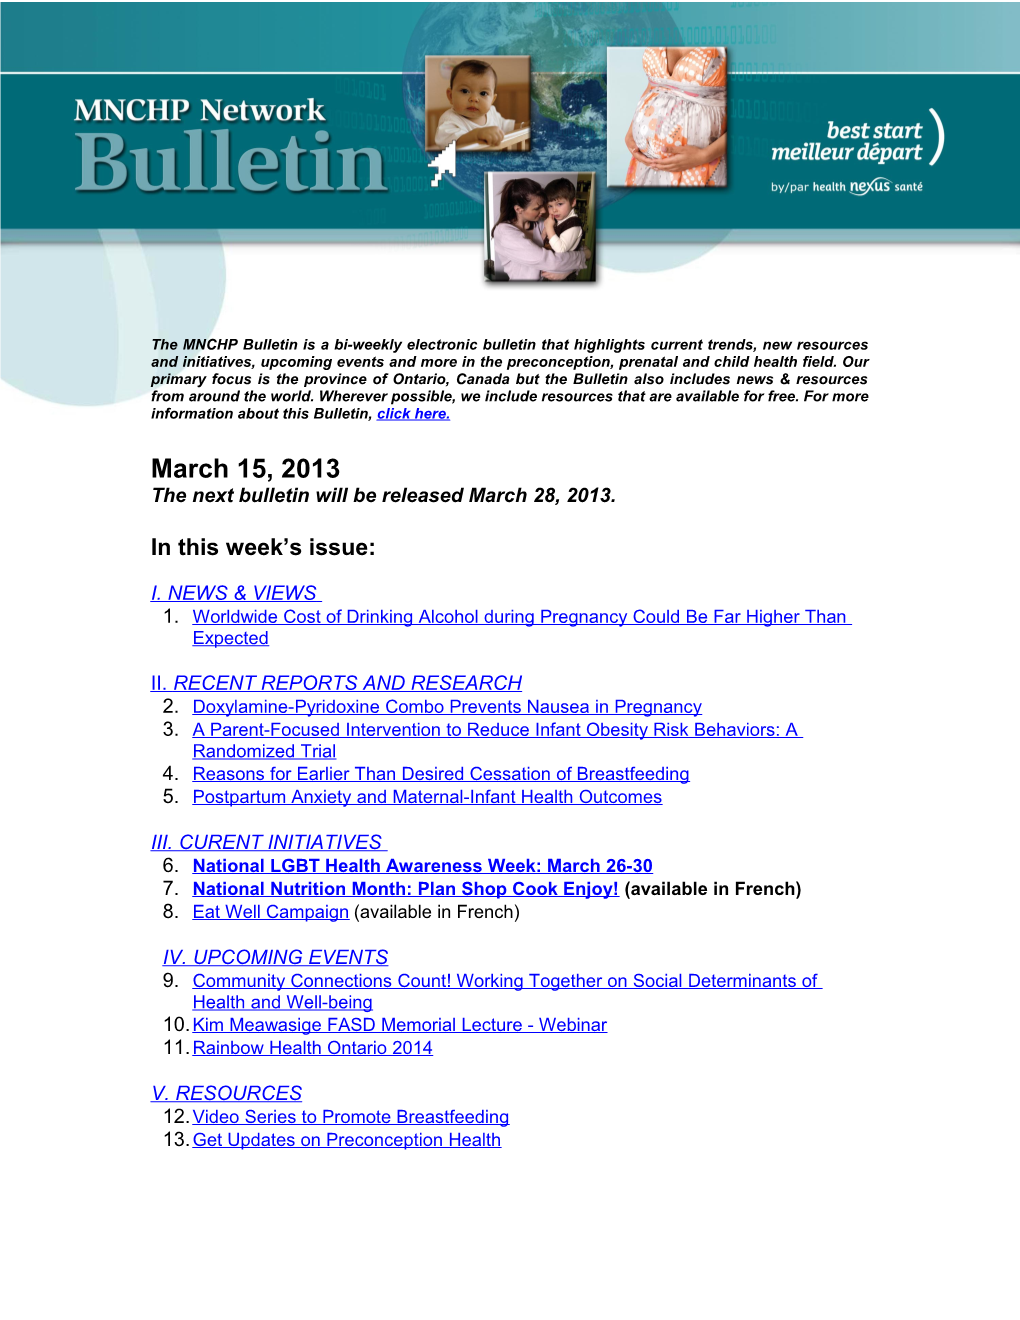 The Next Bulletin Will Be Released March 28, 2013